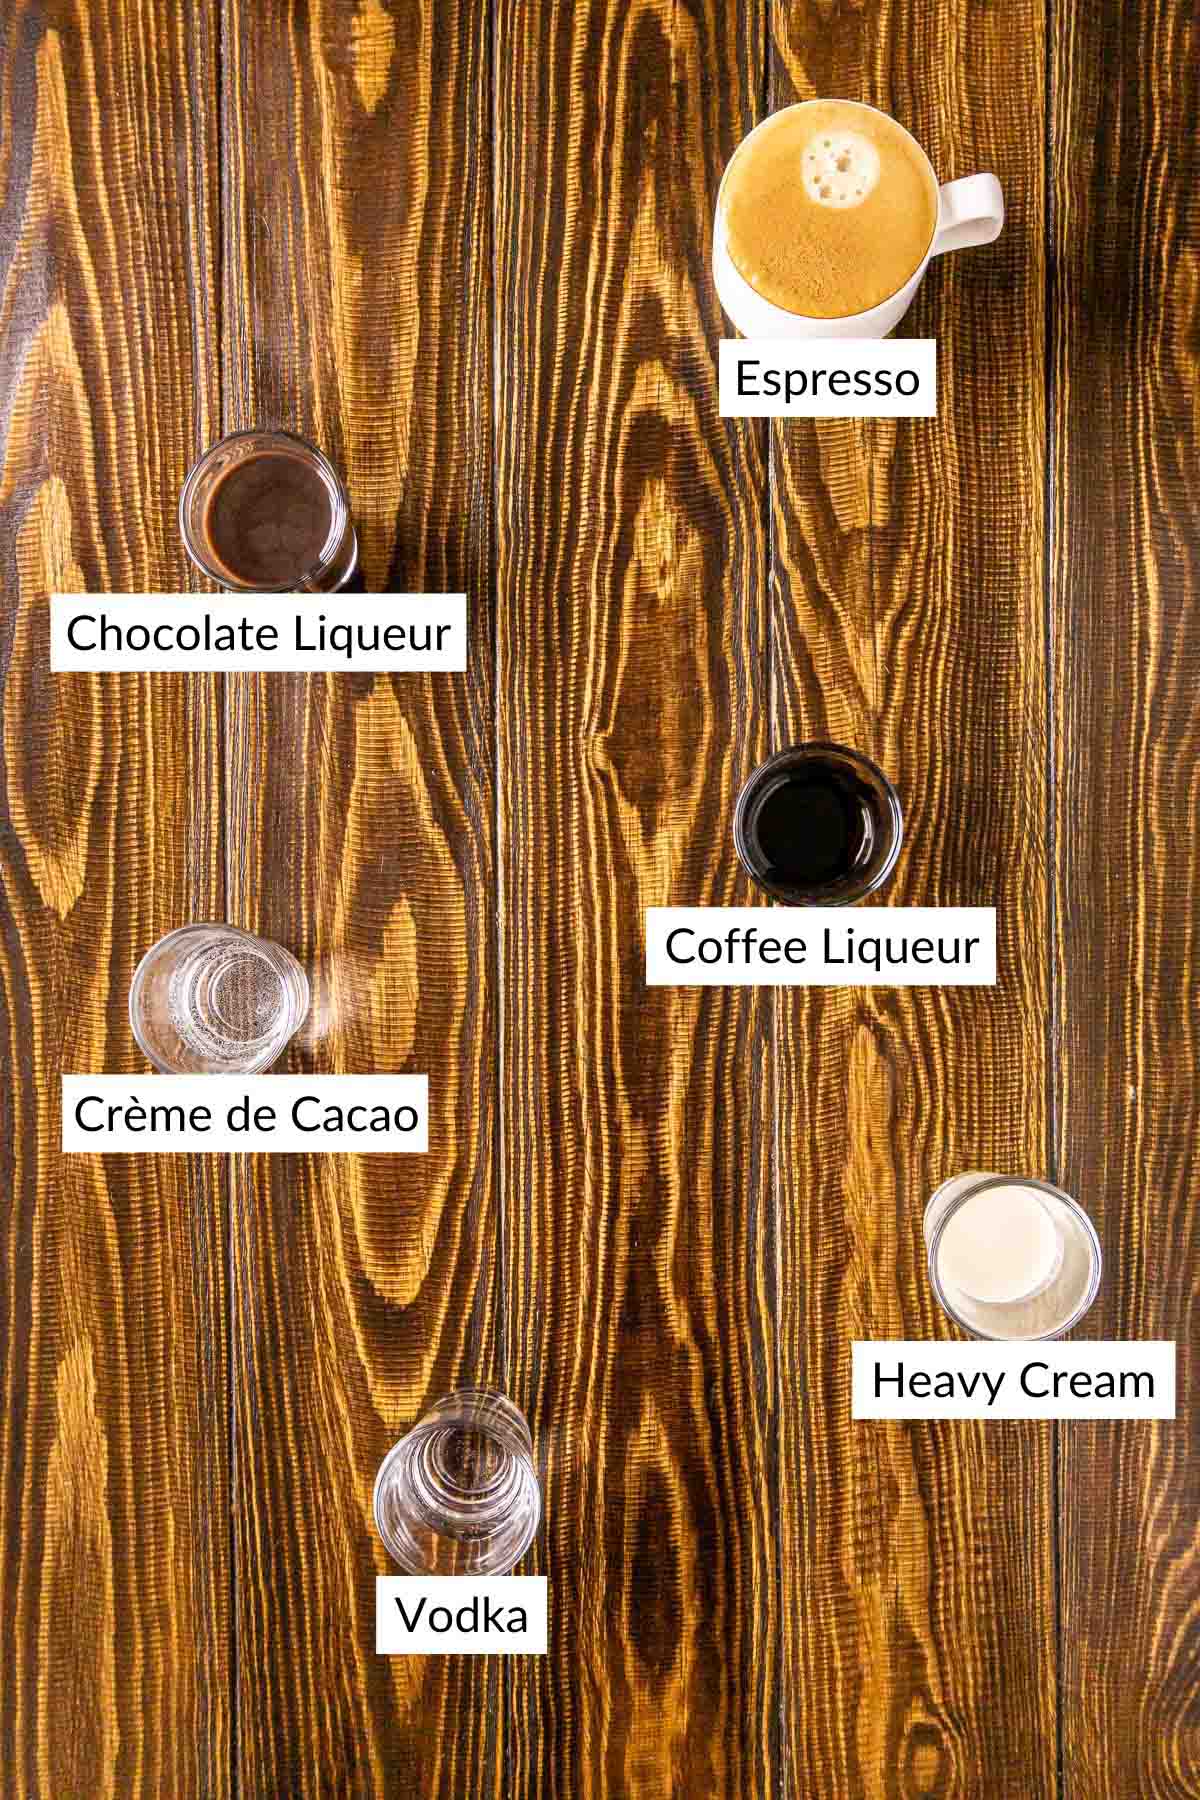 The cocktail ingredients on a wooden board with white and black labels by the items.